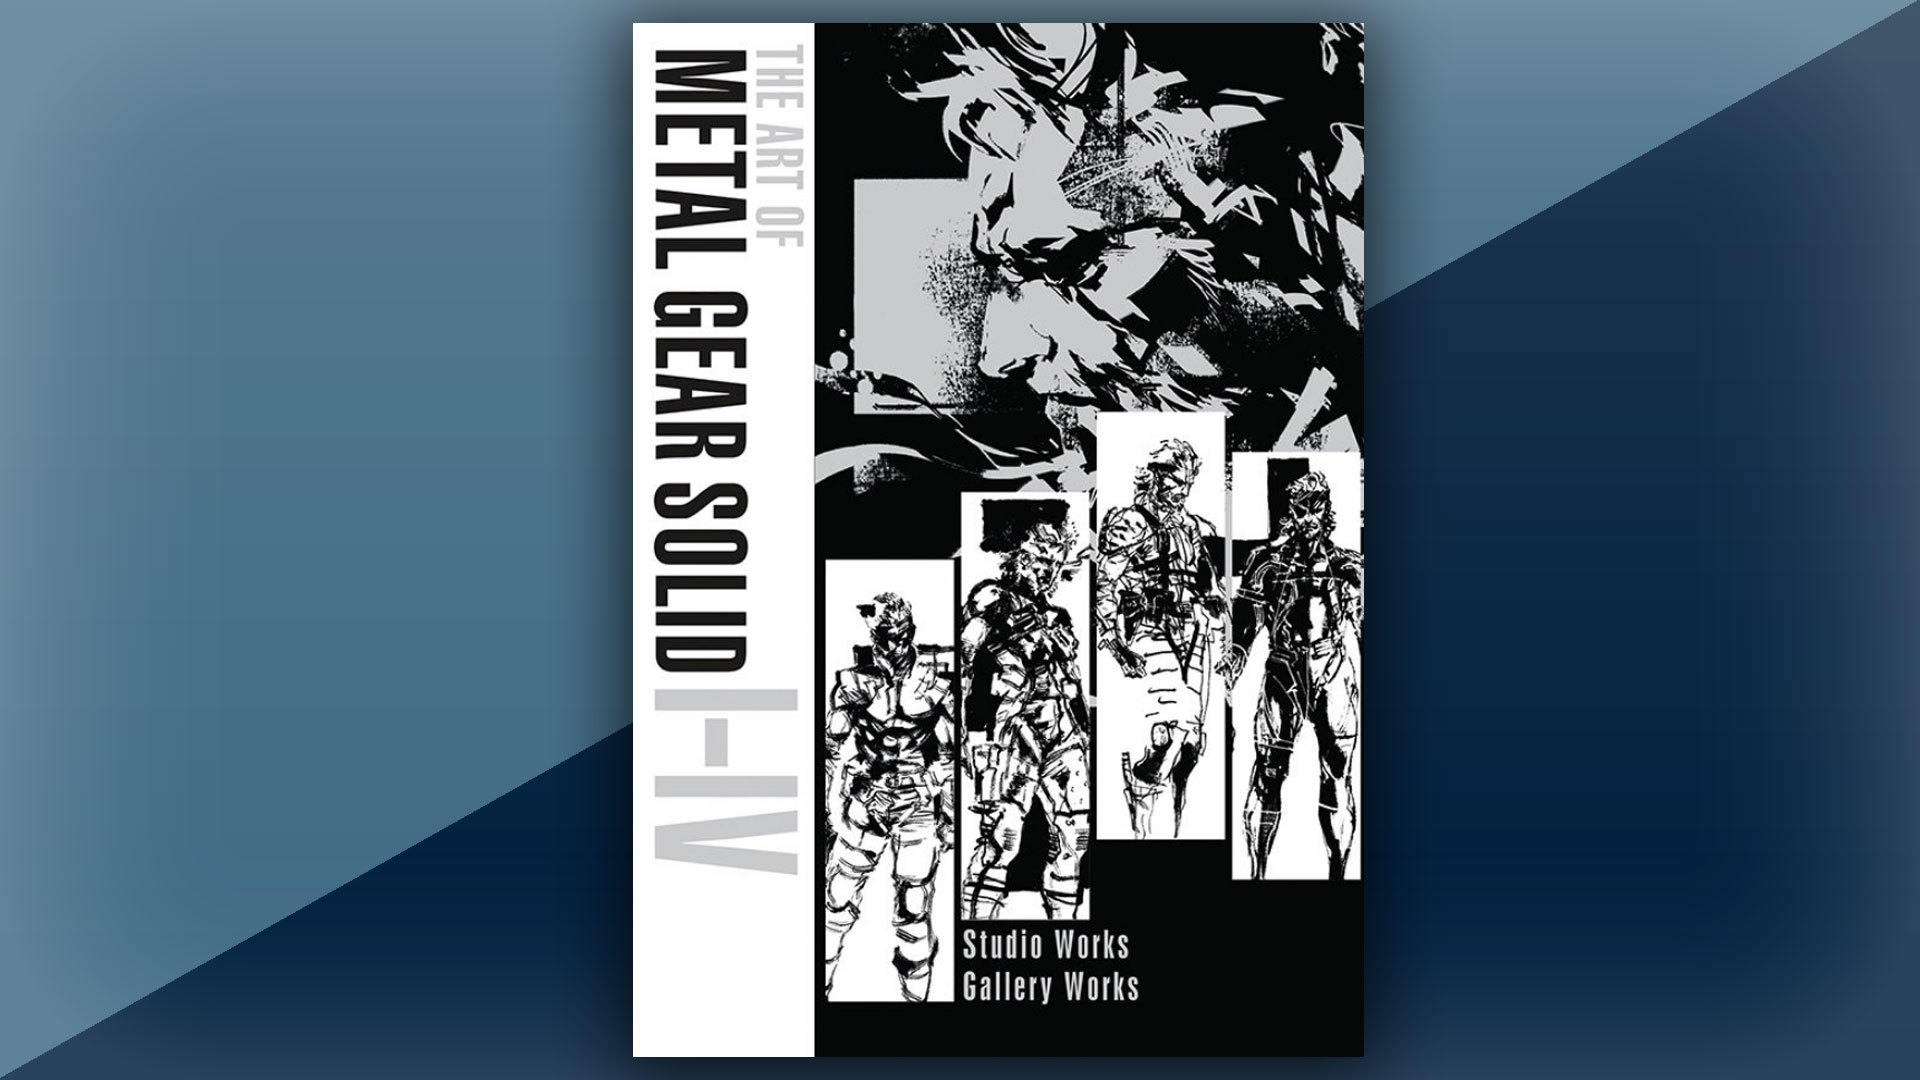 Metal Gear Solid Collectible Art Book Set Gets Massive Discount At